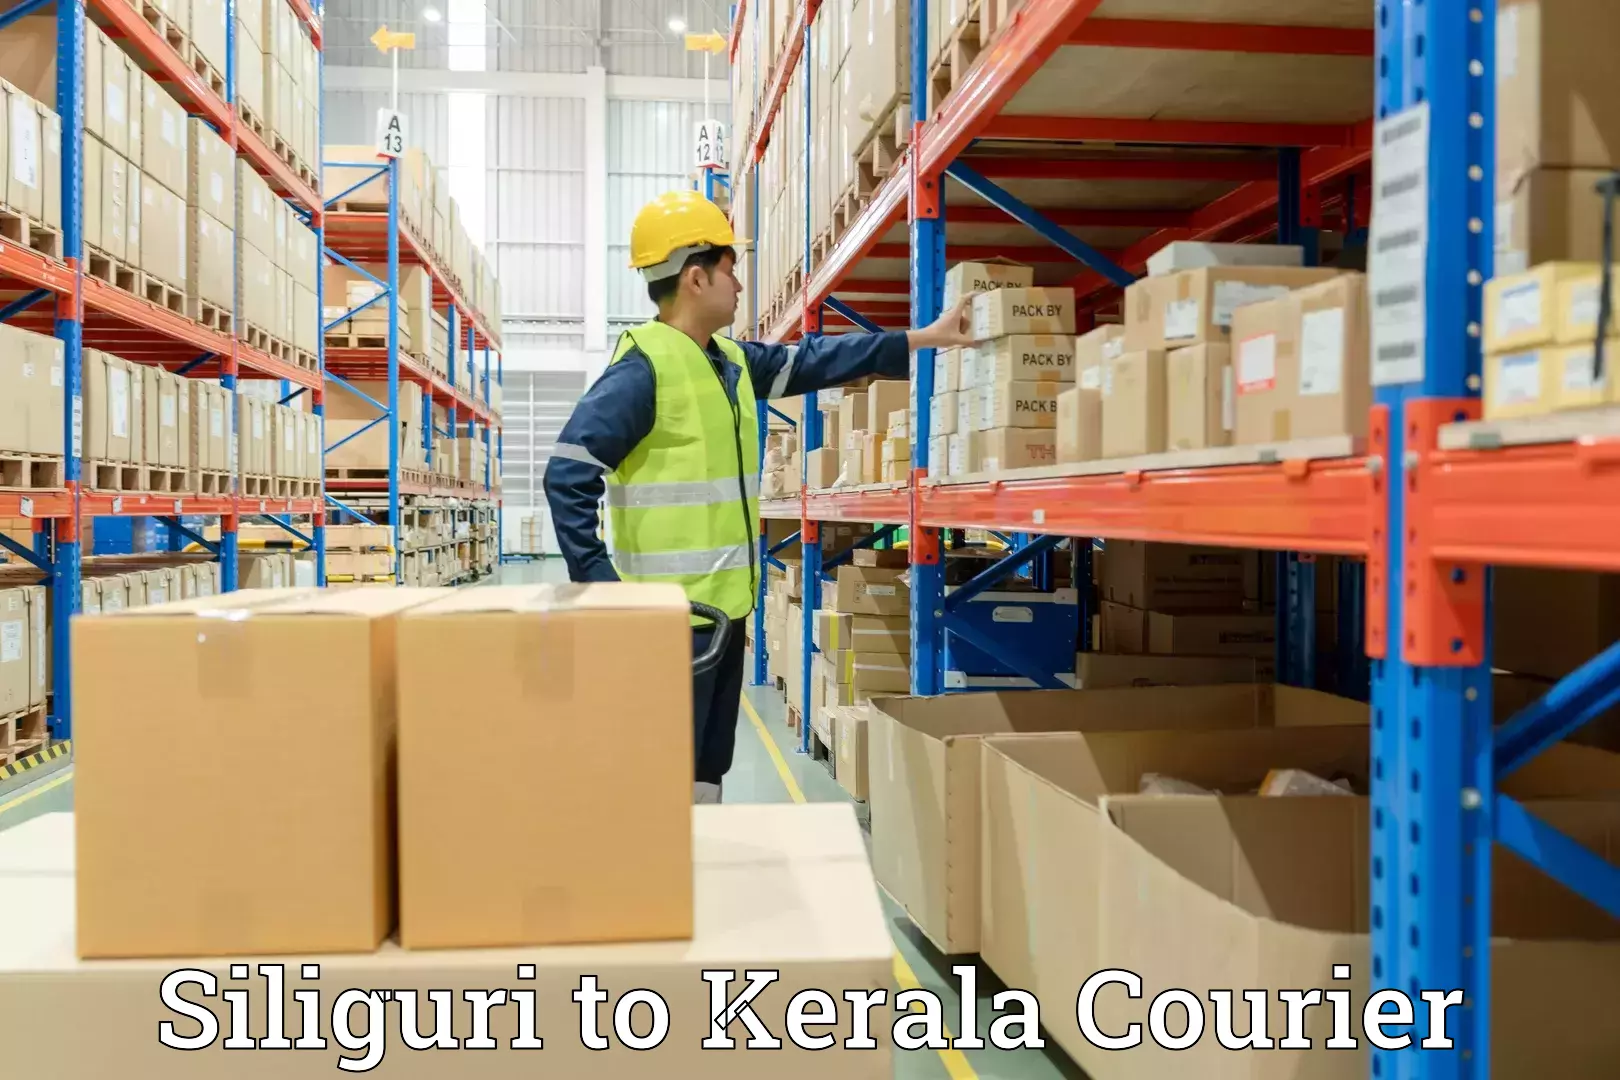 Moving and packing experts Siliguri to Kerala